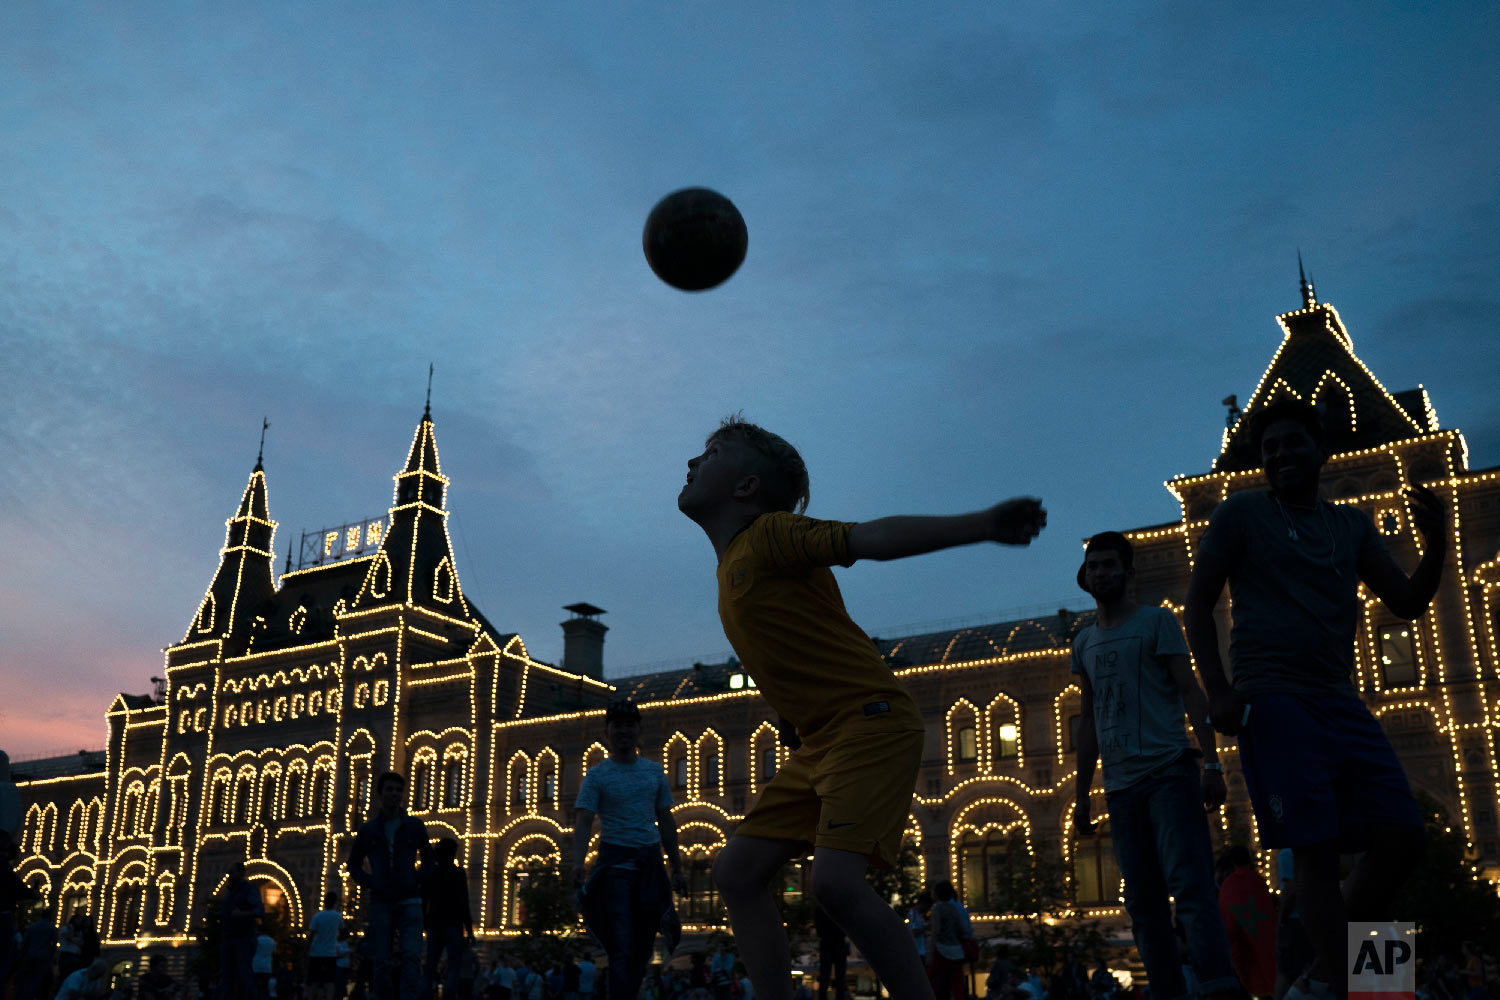  People play soccer at the Red Square during the 2018 soccer World Cup in Moscow, Russia on June 19, 2018. (AP Photo/Felipe Dana) 